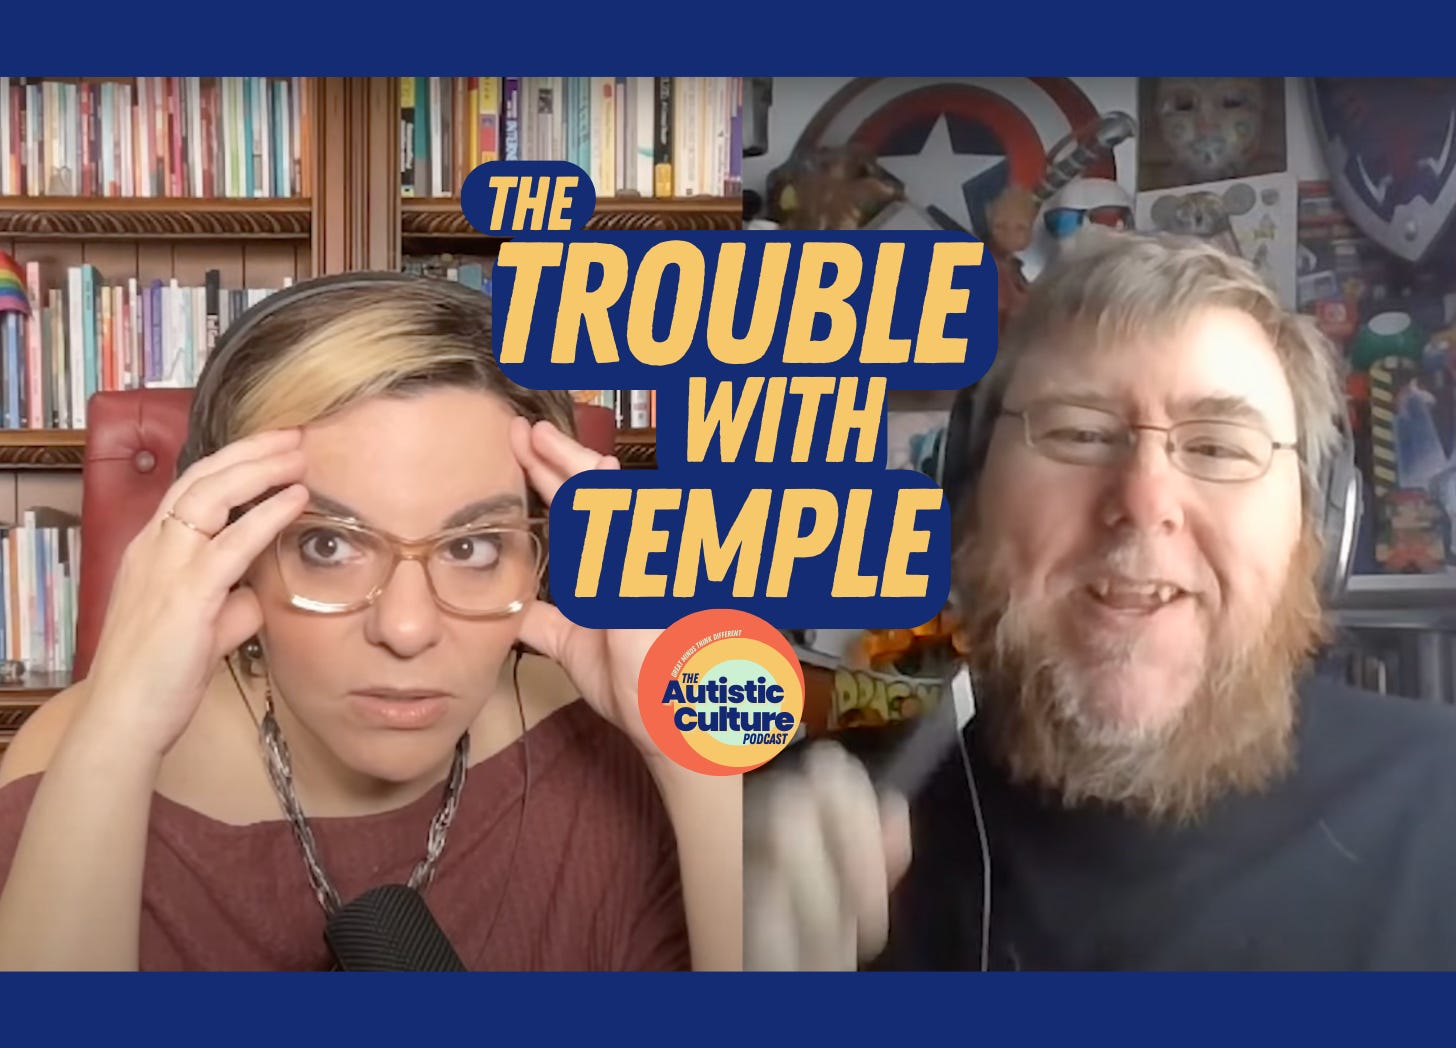 Listen to Autistic podcast hosts discuss: The Trouble with Temple. Autism podcast | Temple Grandin might be the Christopher Columbus of Autistic Culture. The good, the bad, and the ugly--we're diving deep on the world's most famously Autistic woman.